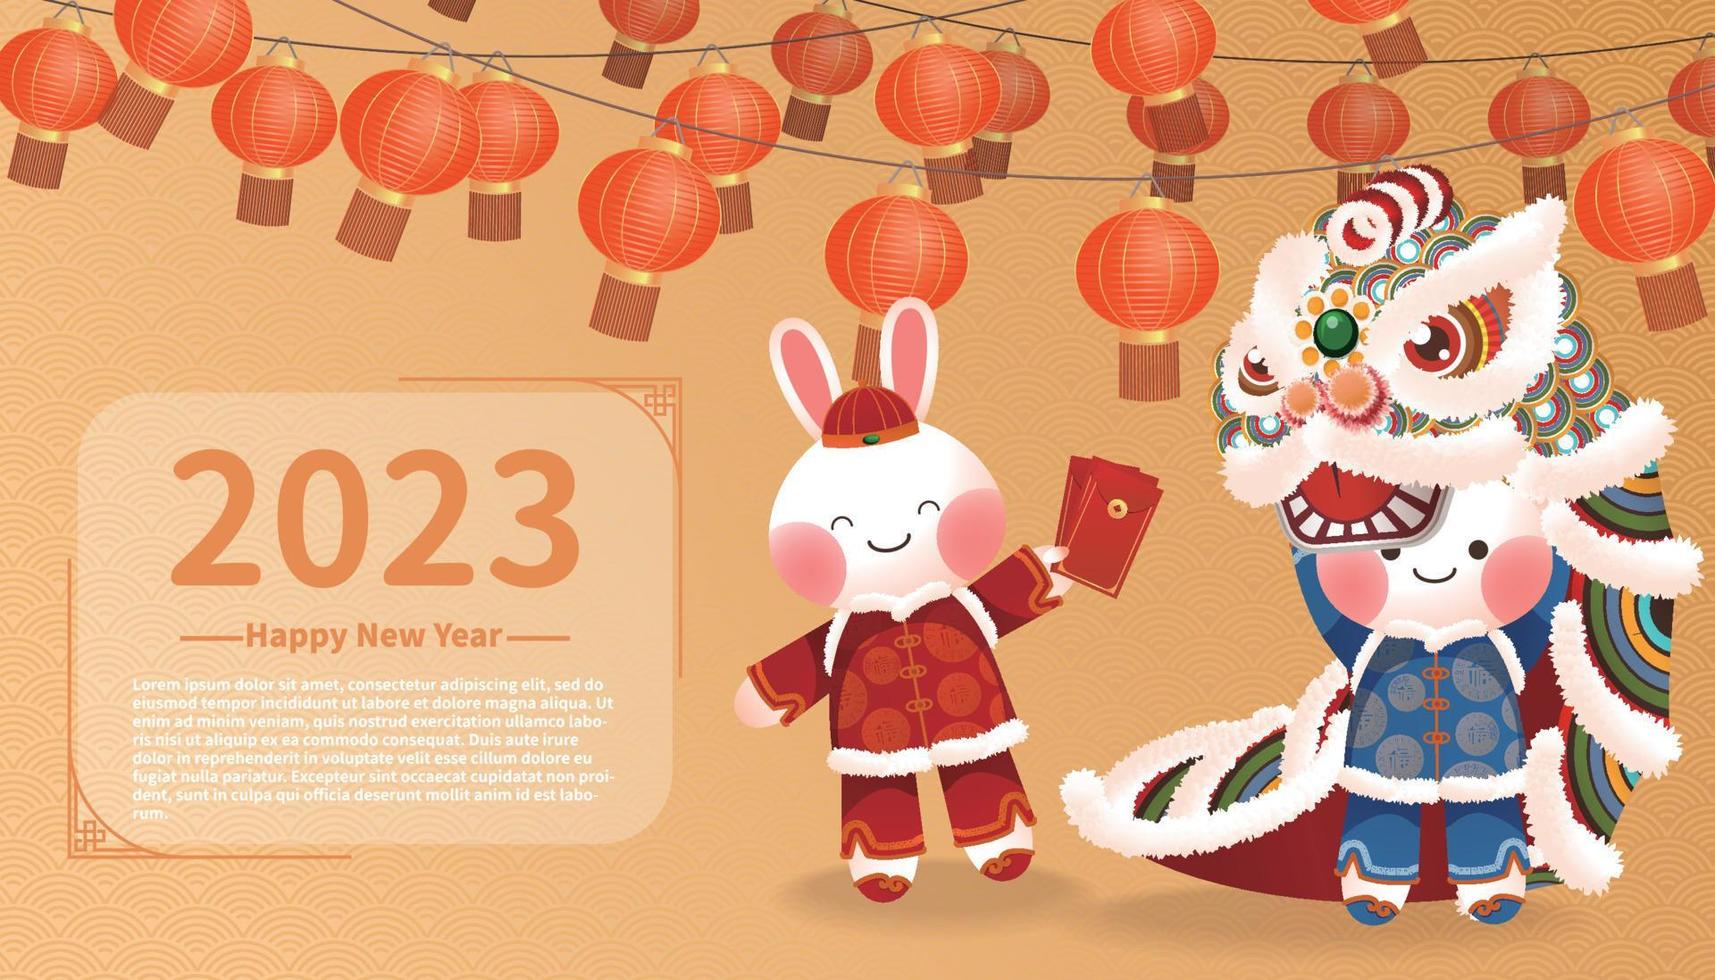 2023 Chinese New Year text with lantern and rabbit vector